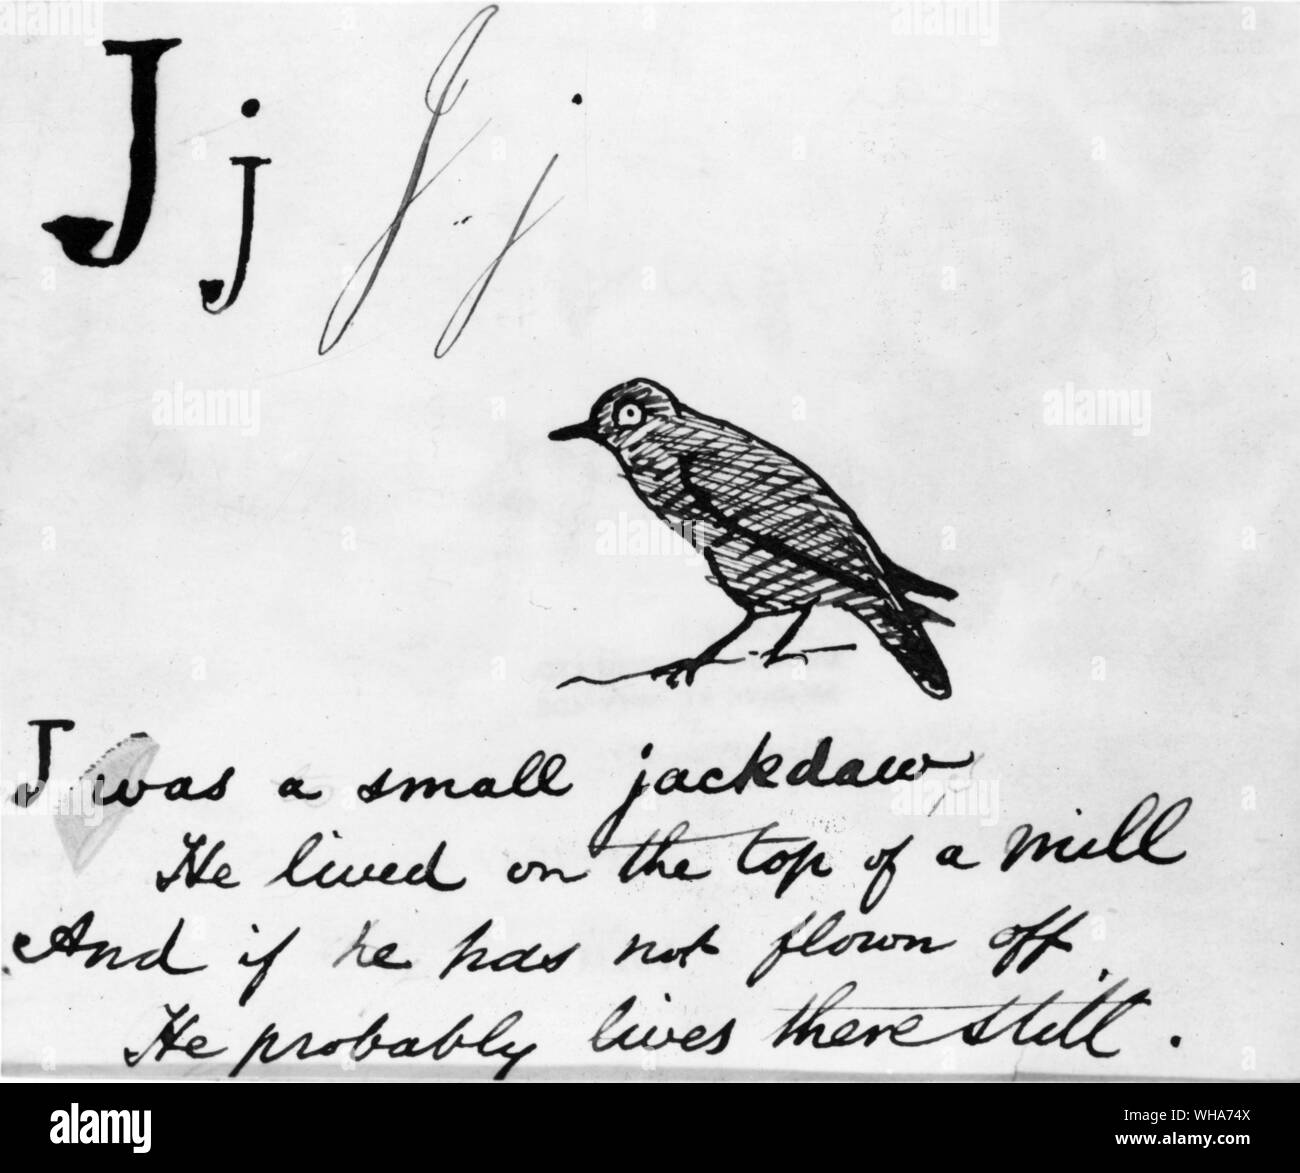 Edward Lear. . J for Jackdaw. . J was a small jackdaw. He lived on the top of a mill. And if he has not flown off. He probably lives there still Stock Photo